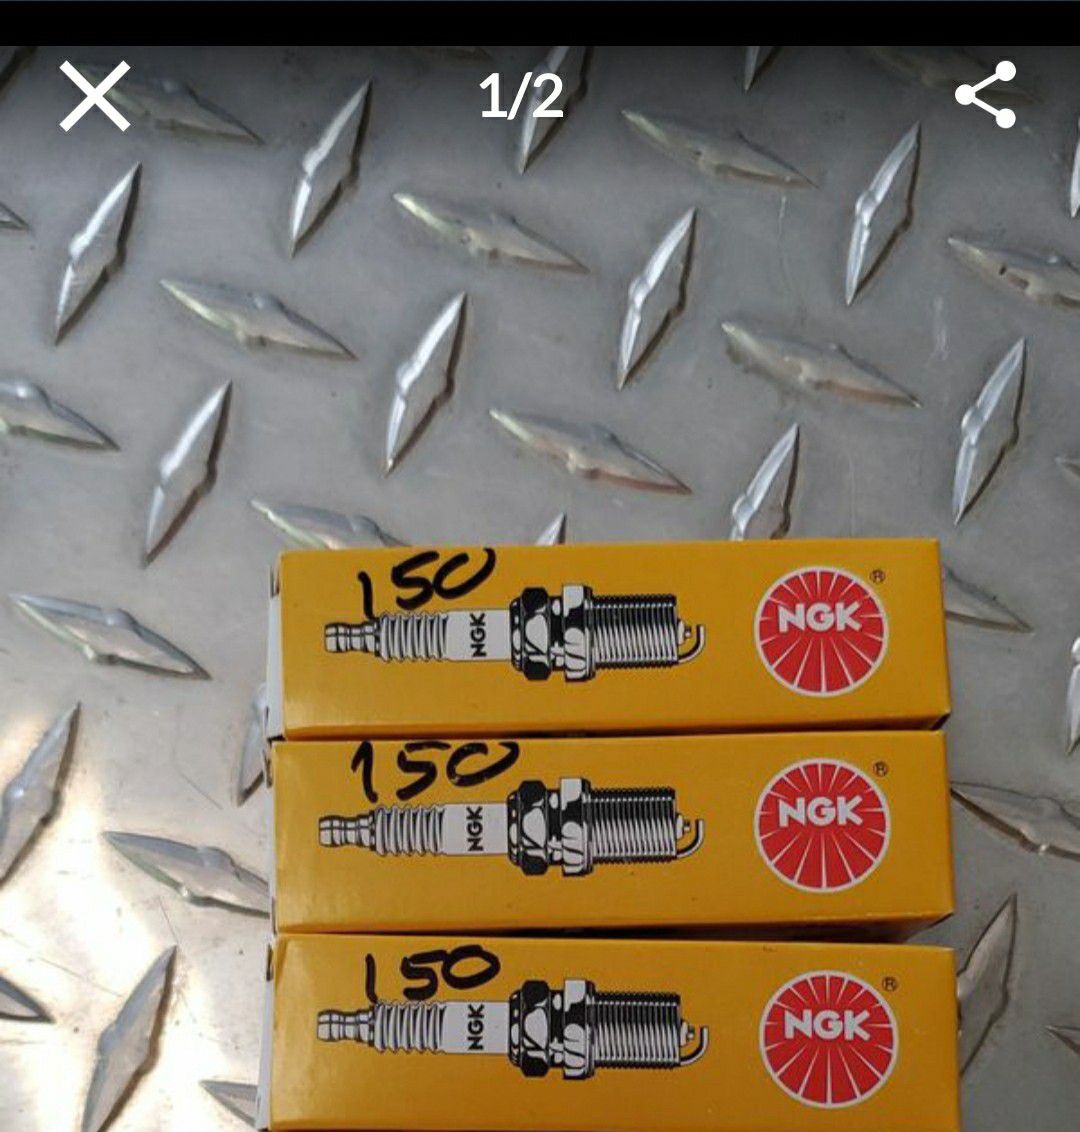 Spark plugs for 3 CRF 150